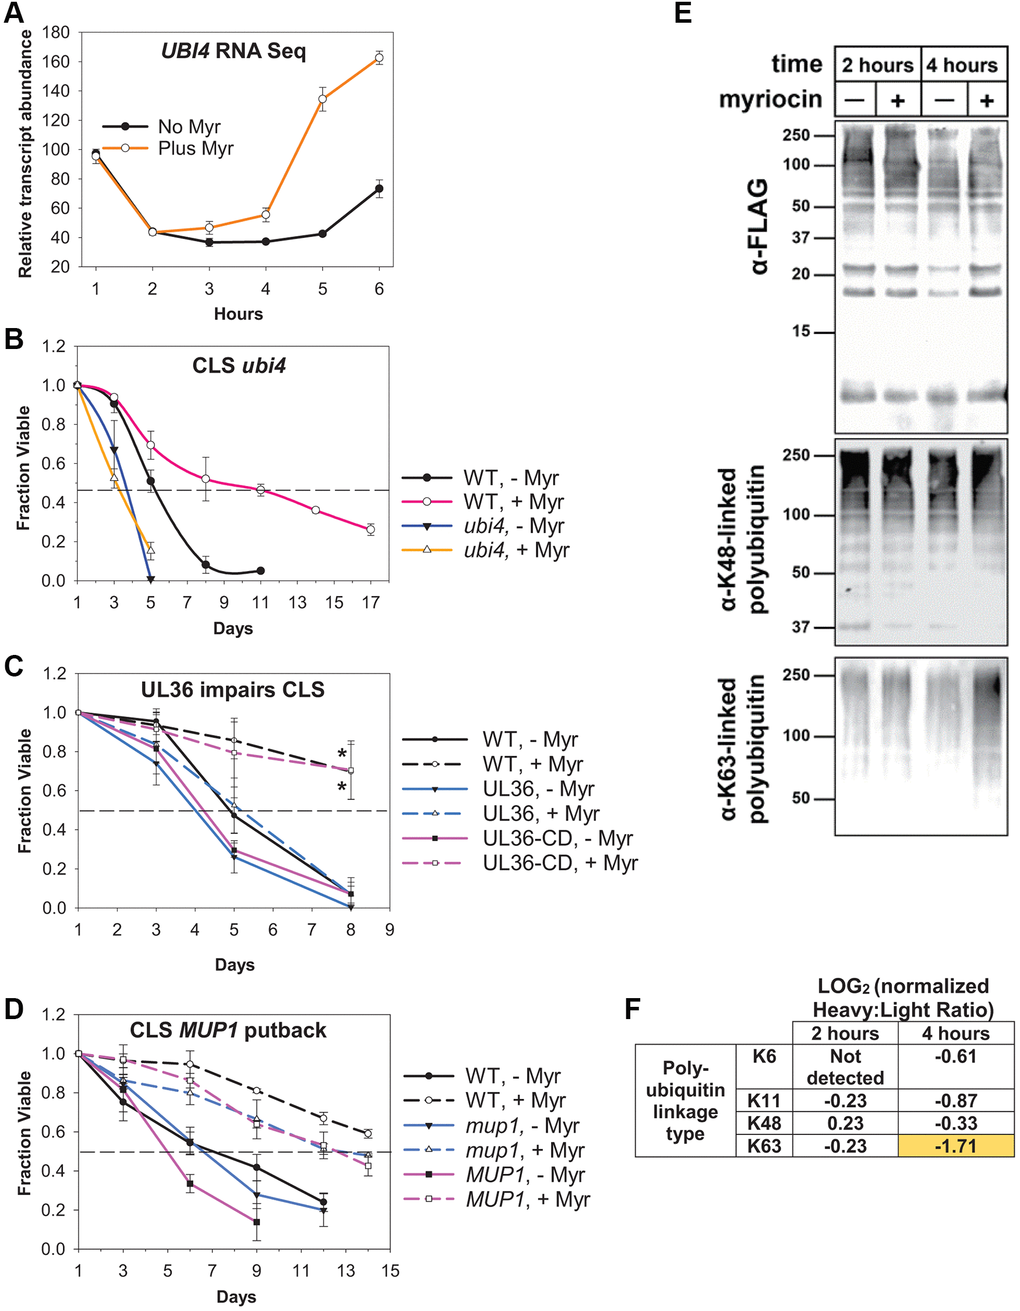 Ubiquitin plays a central role in Myr-enhanced longevity. (A) Summary of the relative abundance of UBI4 transcripts across the 1–6 h time frame in Myr-treated or untreated cells. (B) CLS assay showing decreased survival of untreated (- Myr) ubi4Δ cells verses WT (BY4741) untreated cells and the complete lack of Myr-enhancement of lifespan in ubi4Δ cells compared to strong enhancement in WT cells. Error bars: SD (N = 3). (C) Data showing that removing ubiquitin from Mup1 impairs Myr-enhanced CLS. Cells having Mup1-pHlurion tagged with a UL36 deubiquitinase domain (DUB) are not able to respond to Myr treatment and enhance CLS. In contrast, replacing catalytically active UL36 with a catalytically dead UL36 domain (UL36-CD) restores Myr-enhanced lifespan. WT = BY4741 Mup1-pHluorin cells. Statistical significance at day 8 was determined (Student’s t-test) for Myr-treated WT vs. UL36 and UL36-CD vs. UL36 cells: p-values ≤ 0.024 and 0.032, respectively. Error bars: SEM (N = 3). (D) Lifespan assays reveal that deletion of mup1 does not impair Myr-enhanced longevity. WT (BY4741) and MUP1 putback (mup1 allele replaced by MUP1) are control strains for the presence of a functional MUP1 gens. Error bars: SEM (N = 3). (E) Affinity purified ubiquitin (from a yeast strain encoding N-terminally FLAG-tagged ubiquitin at two native, chromosomal ubiquitin genes) and blotted for total ubiquitin (top panel) captured as well as K63- and K48-linked polyubiquitin (middle and bottom panels, respectively) in cells treated on not treated with Myr after 2 or 4 h of cell growth. (F) SILAC-MS analysis of untreated (Heavy) or myriocin-treated (Light) yeast cells at the indicated time point. Heavy:Llight ratio quantifies relative abundance between the two samples. In this experiment, a negative LOG value indicates increased abundance in the myriocin-treated sample (and vice versa). All measurements were normalized to the Heavy:Light ratio for total ubiquitin (unmodified peptides), which did not significantly differ with Myr treatment at either 2 or 4 h post-myriocin treatment.